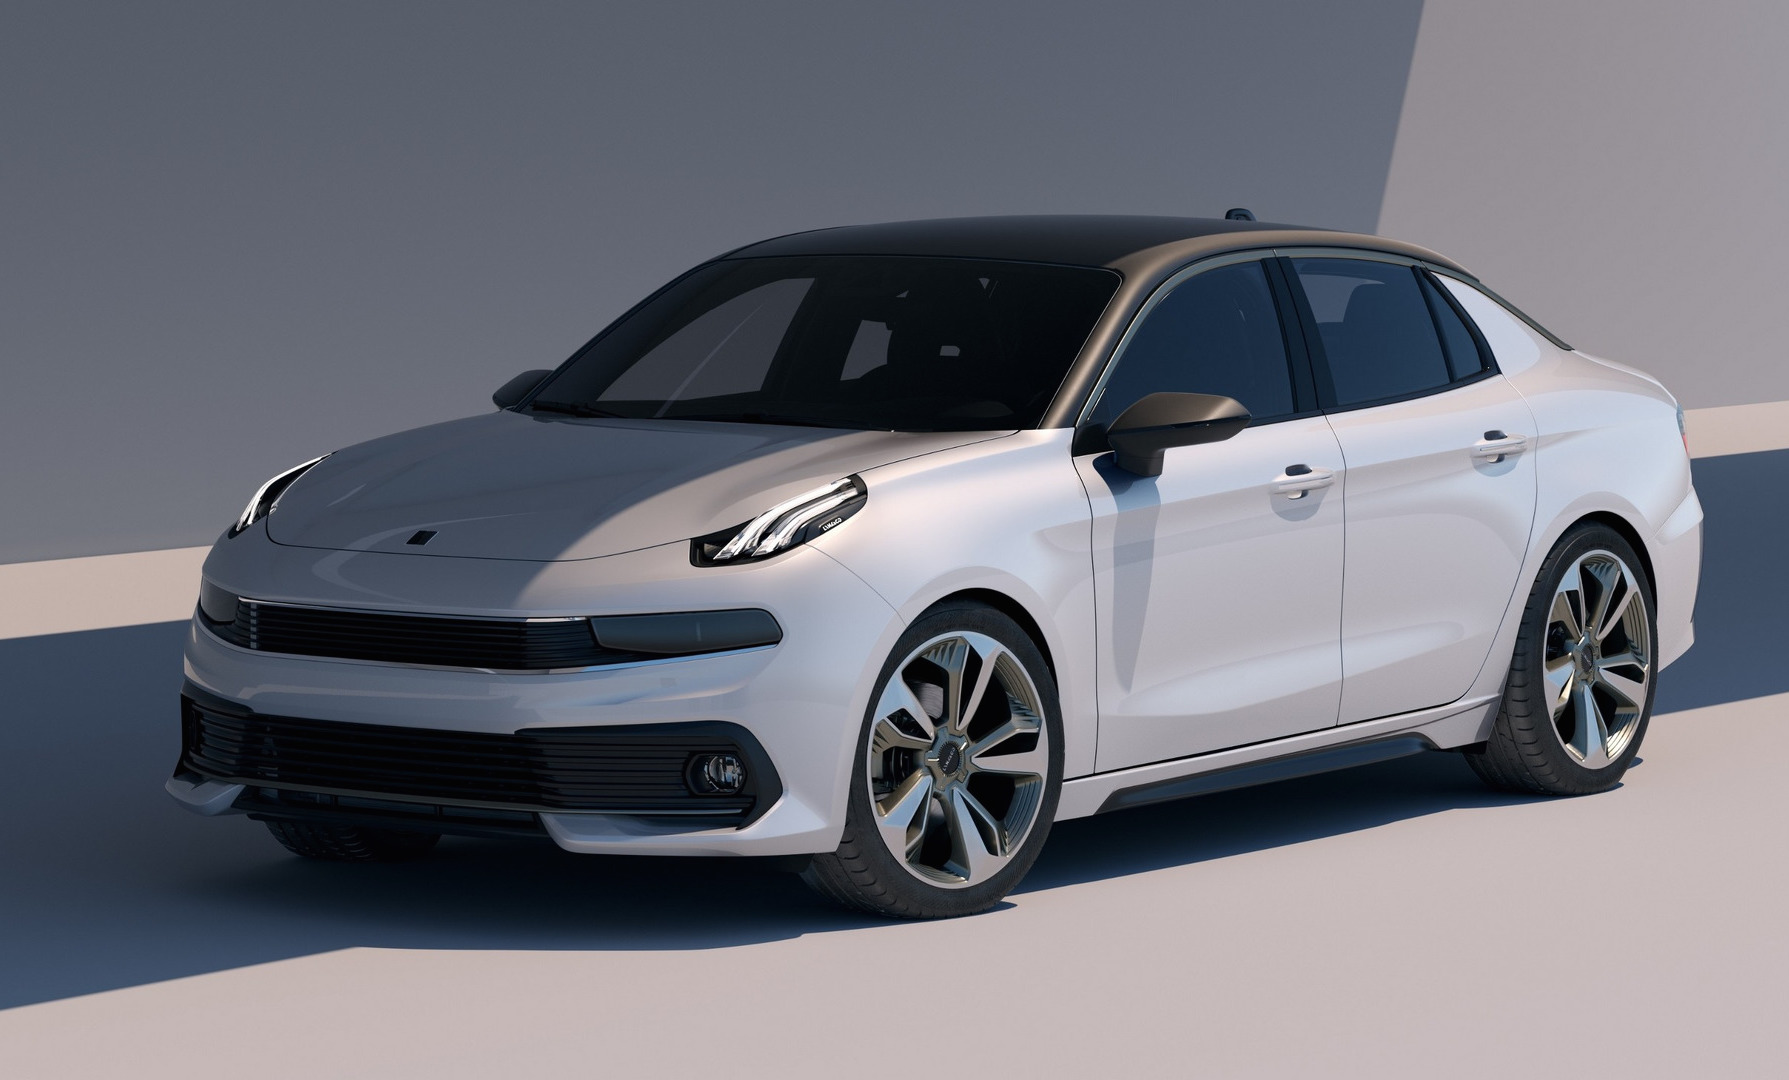 Lynk & Co reveals 03 concept, previewing new sedan